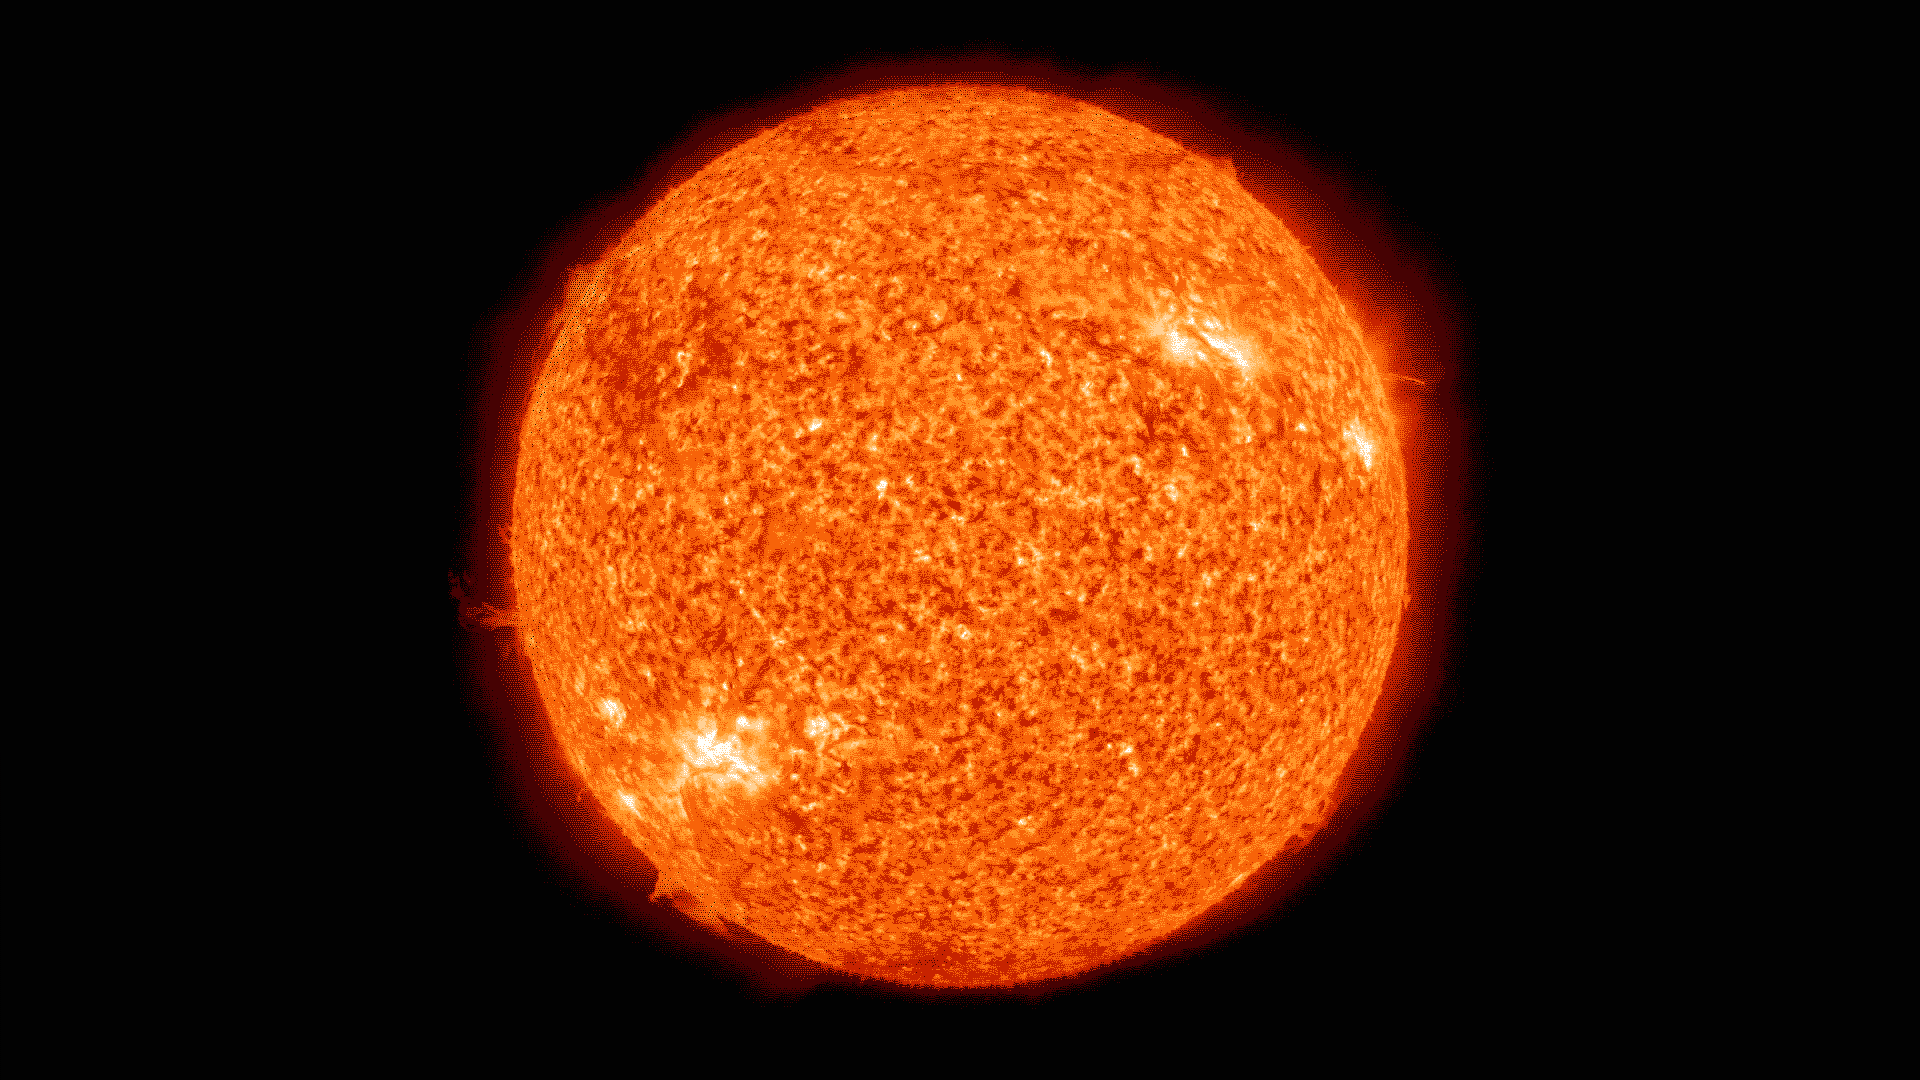 A dithered image of the Sun.